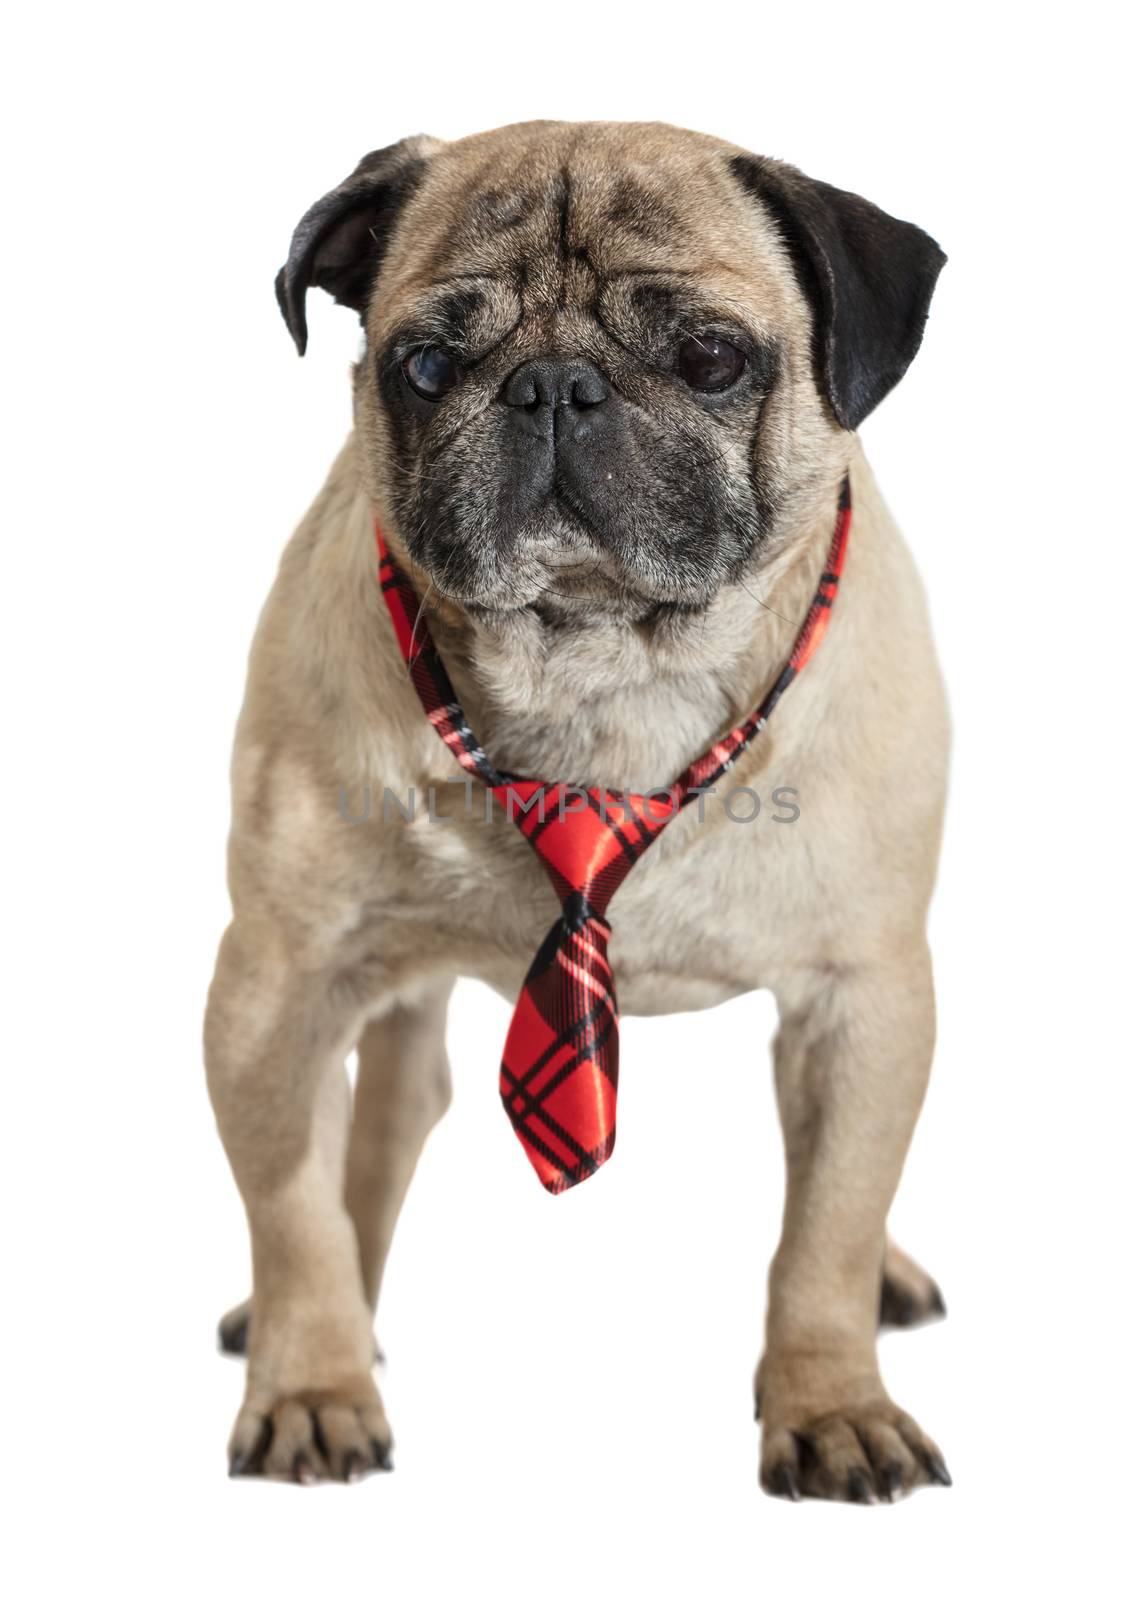 dog pug in tie by MegaArt